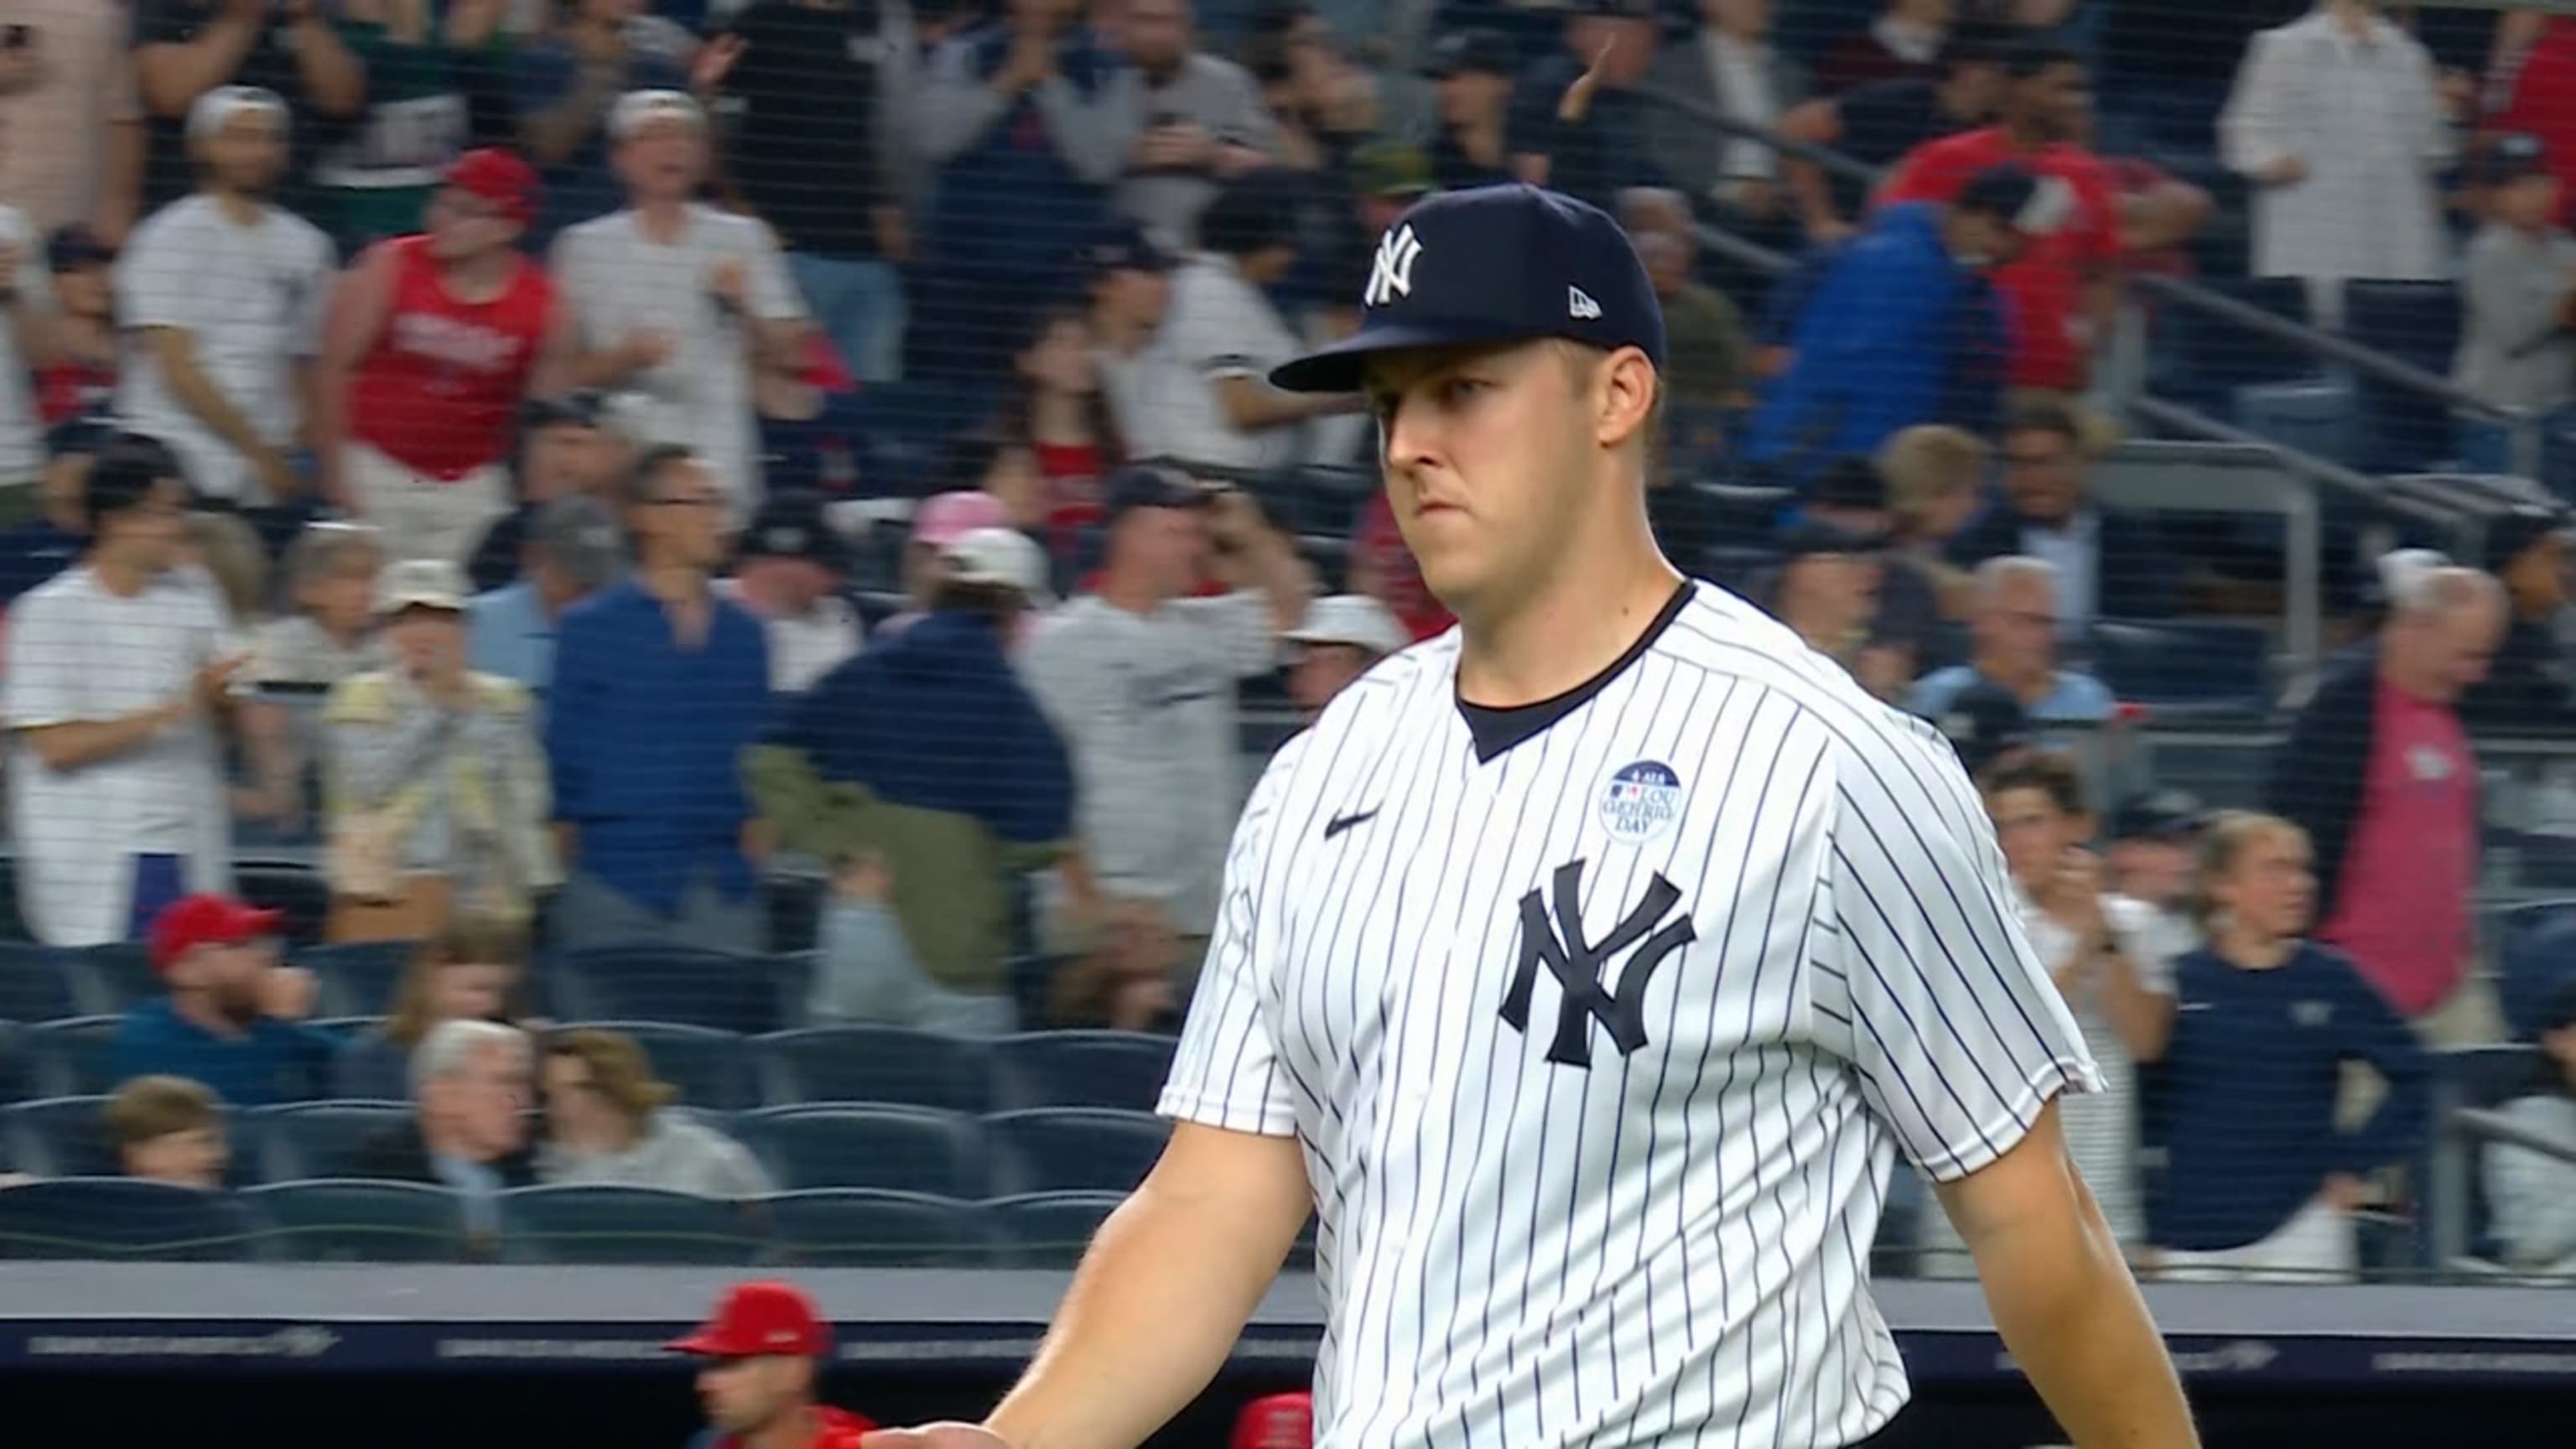 Jameson Taillon is one pitch away from excelling for the Yankees